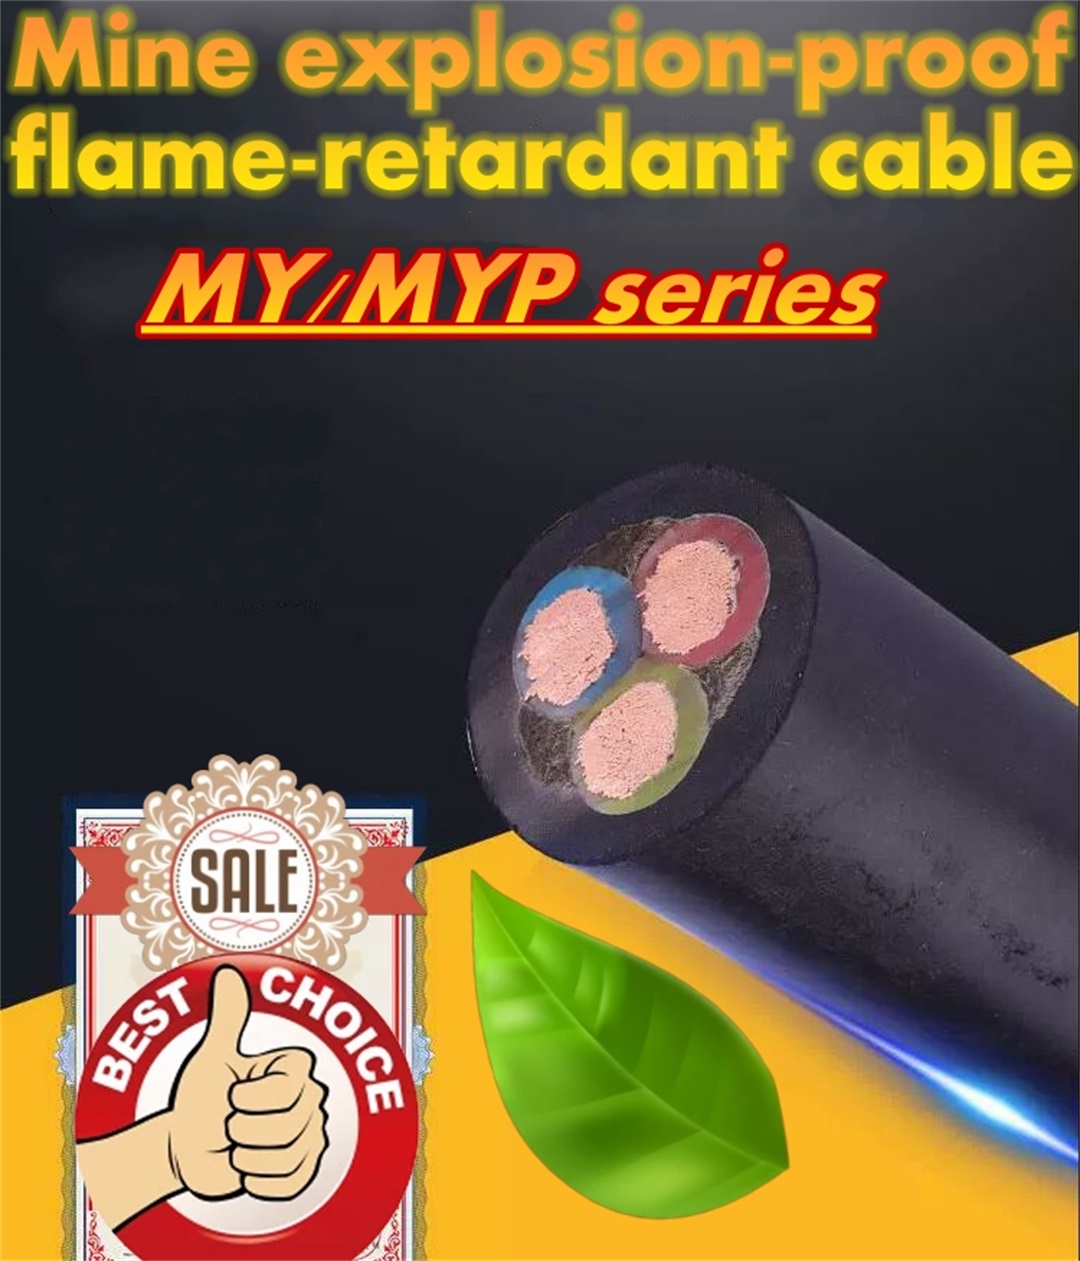 Mobile explosion-proof flame-retardant rubber sheathed flexible copper cable for coal mine